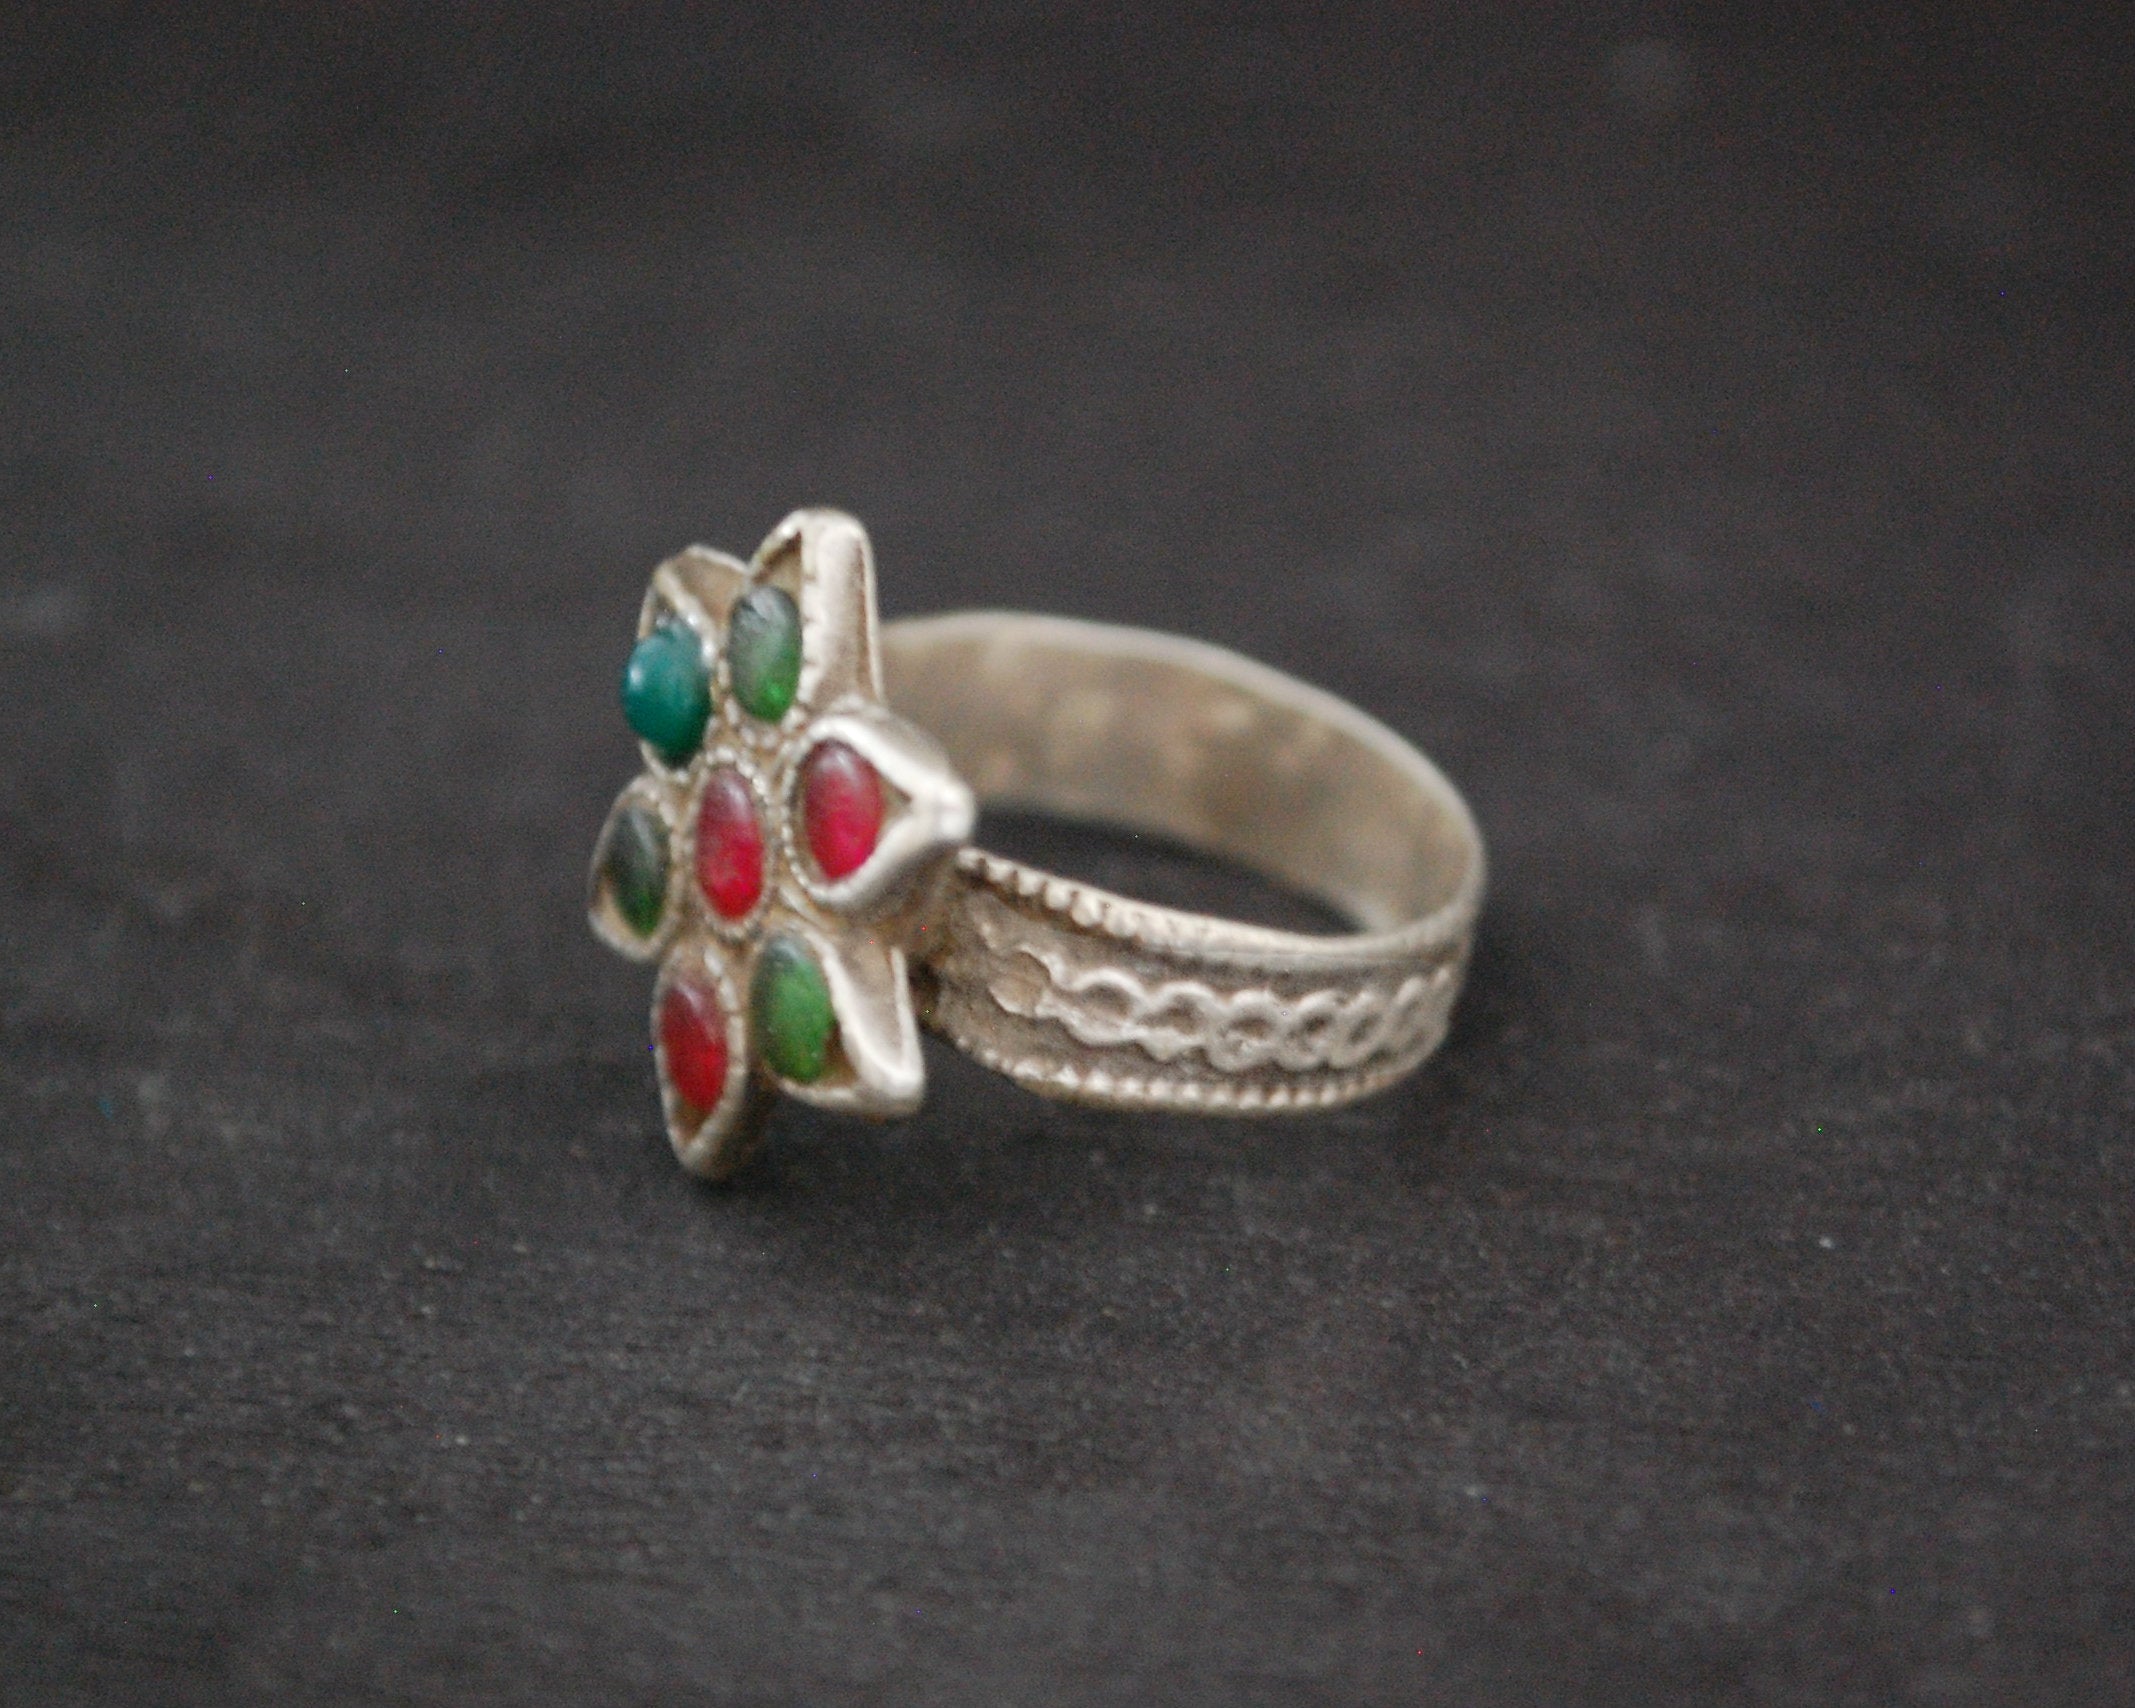 Rajasthani Flower Ring with Glass Stones - Size 6.5